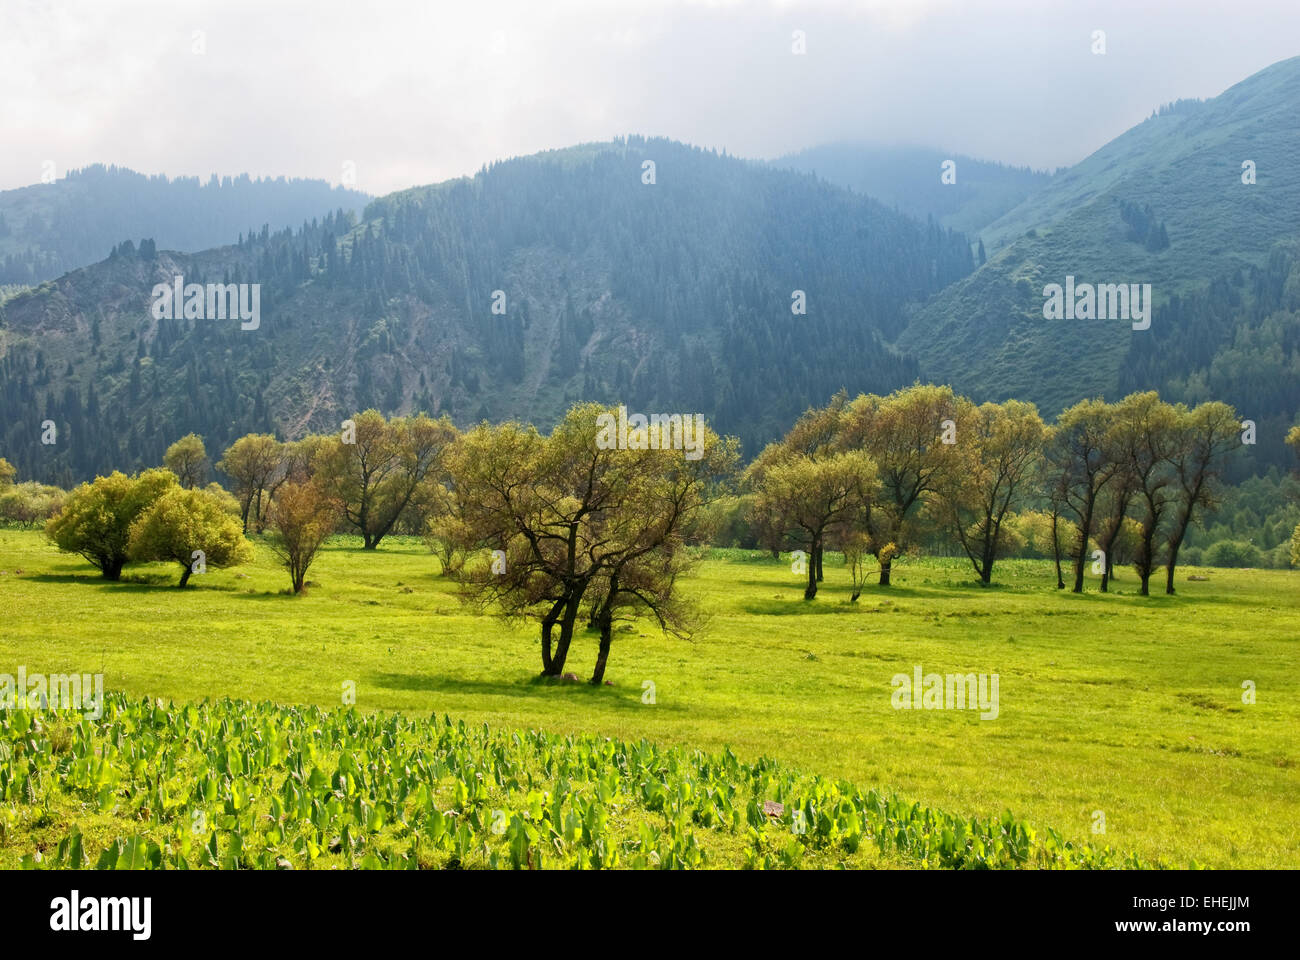 Group of trees in mountains Stock Photo